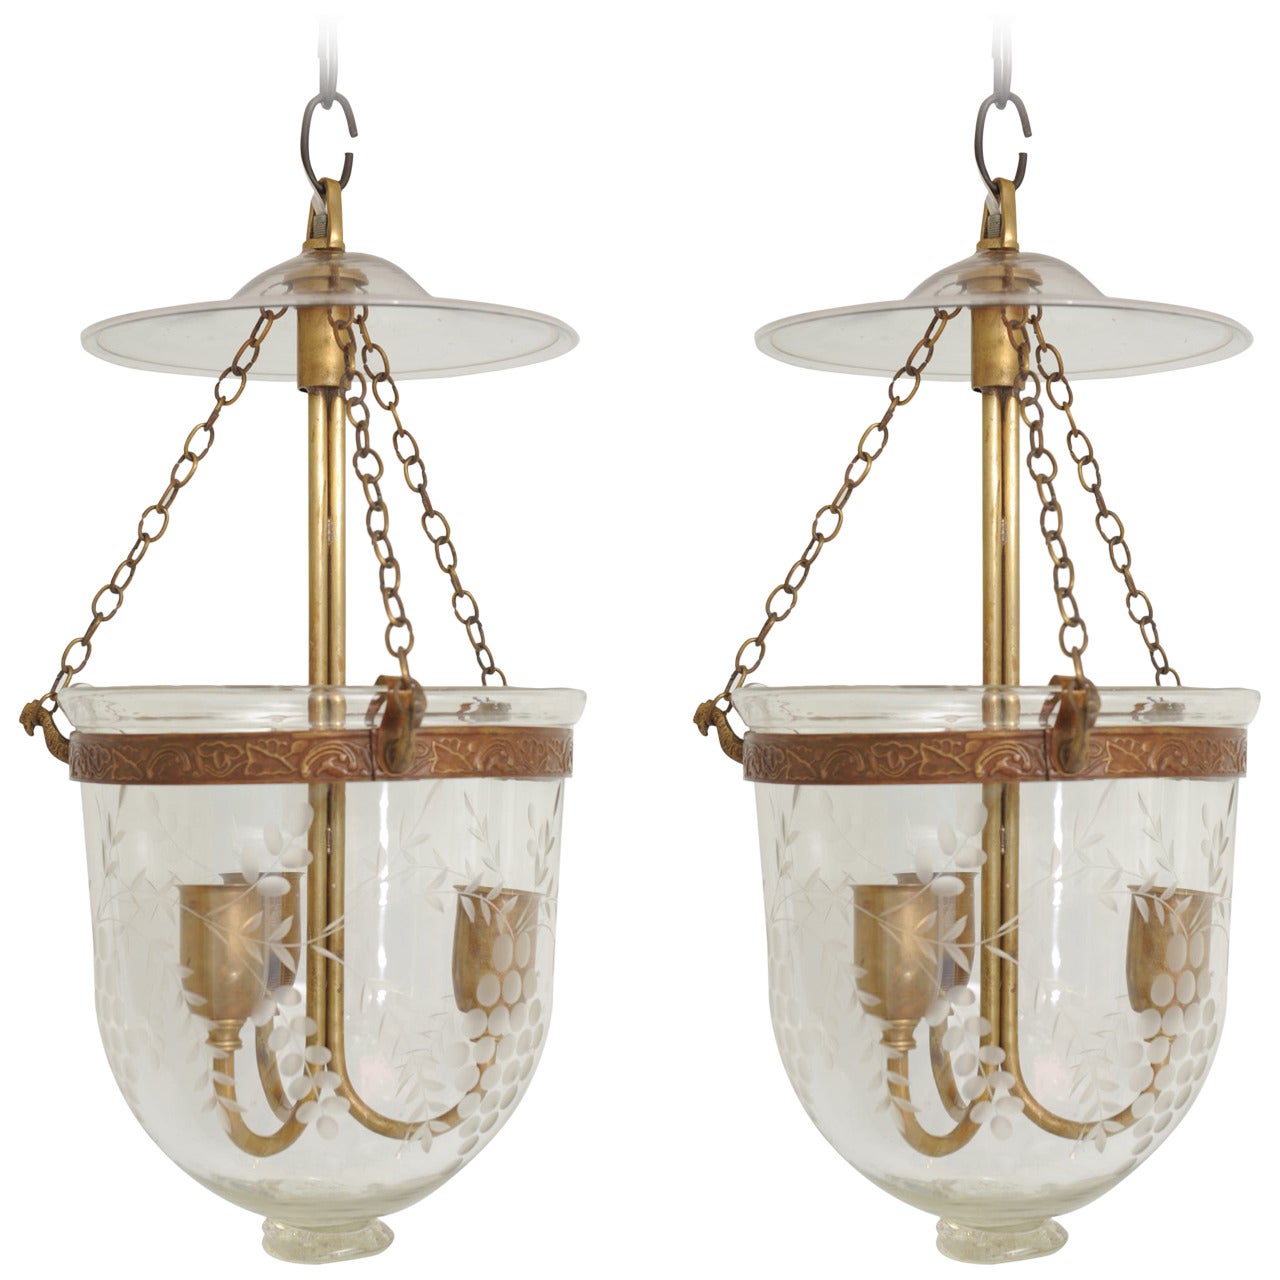 Pair of Early 20th Century English Bell Jar Hall Lanterns with Smoke Cap